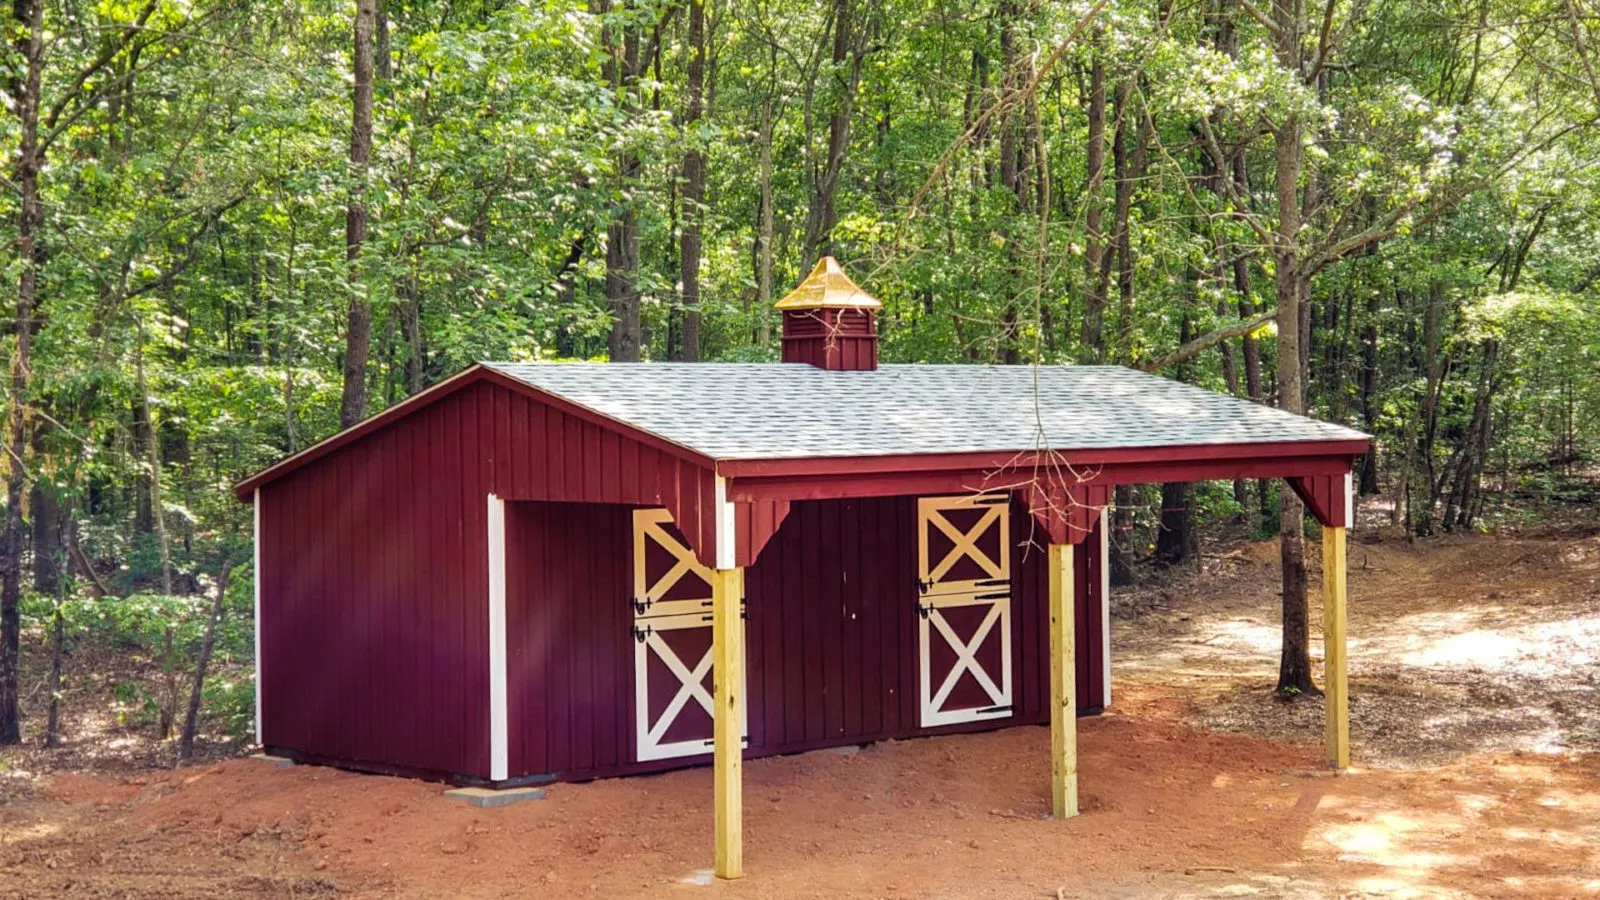 exterior of red horse lean to shed near woods in SC